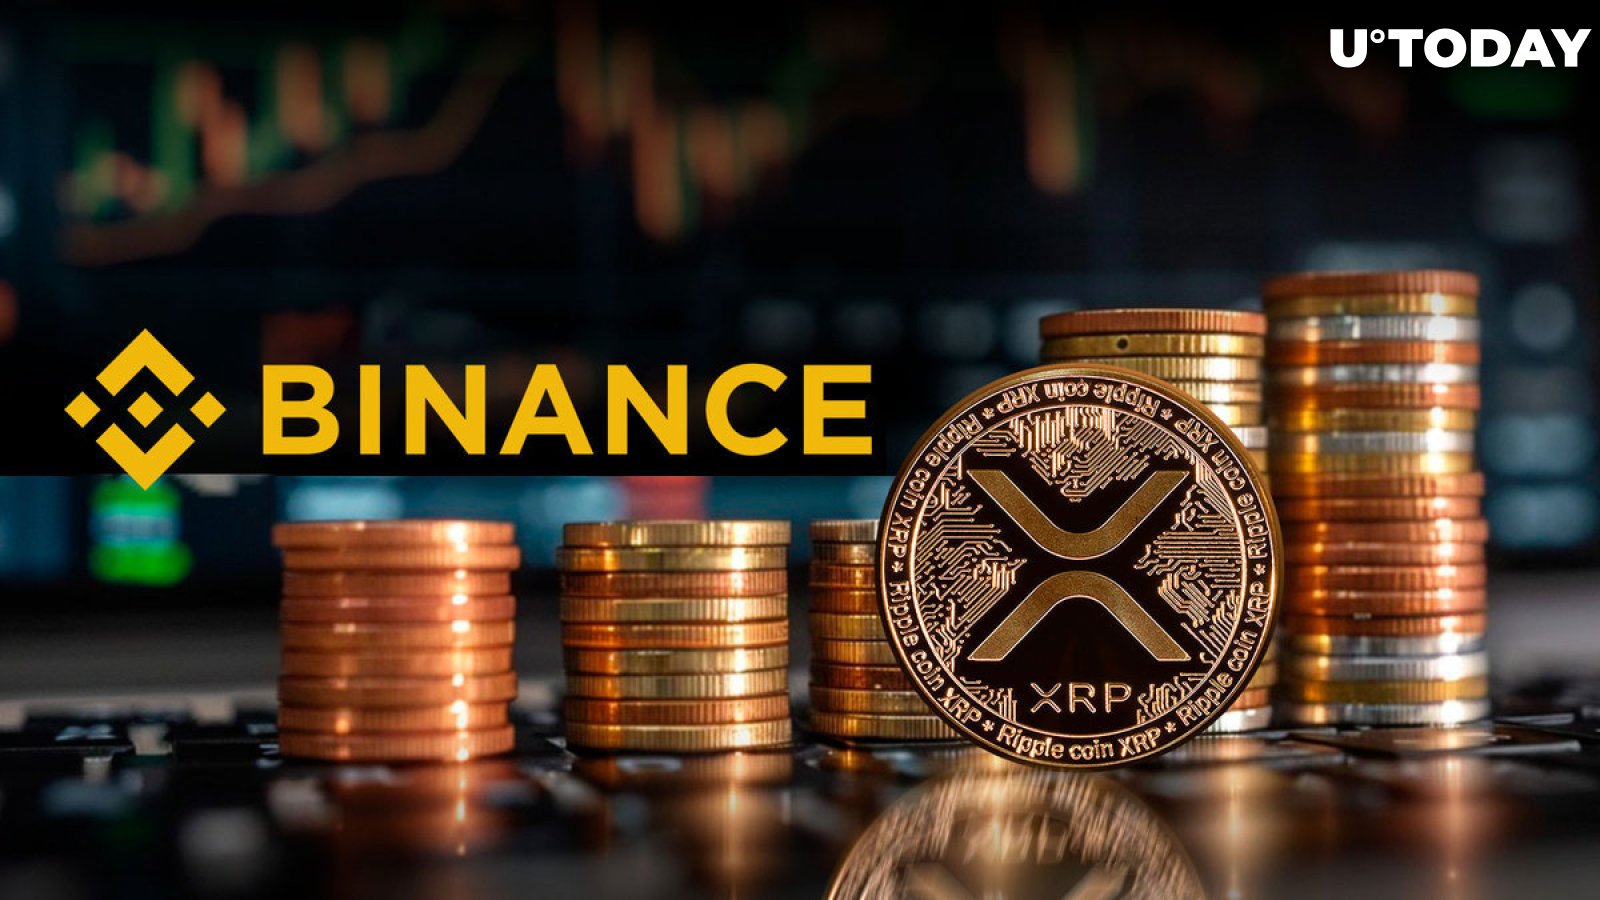 Binance Transfers 100 Million XRP to Mysterious Blockchain Whale, Buyer Revealed